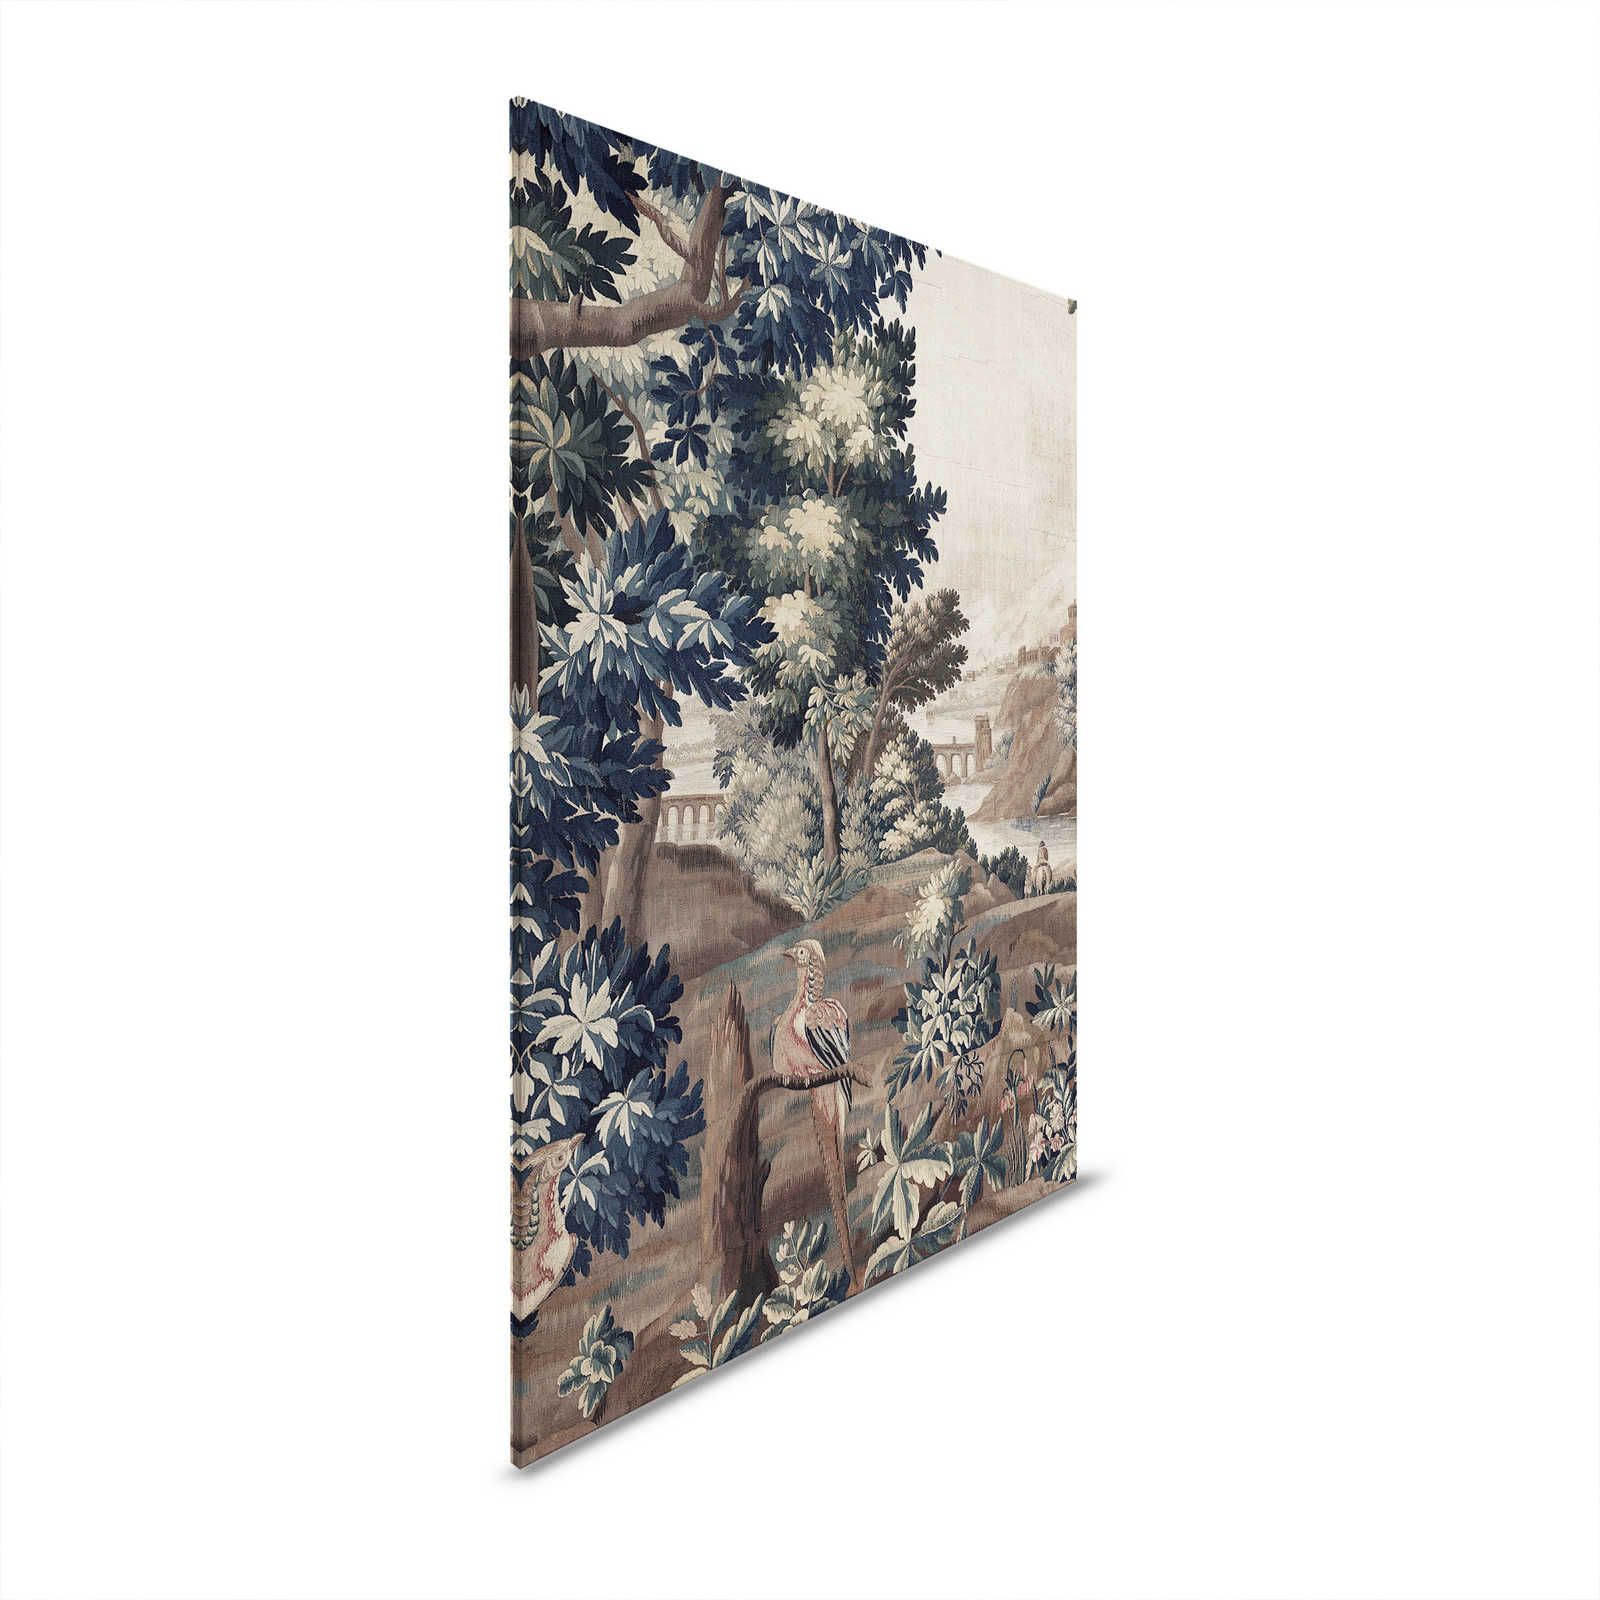 Gobelin Gallery 2 - Canvas painting tapestry classic art style - 1.20 m x 0.80 m
